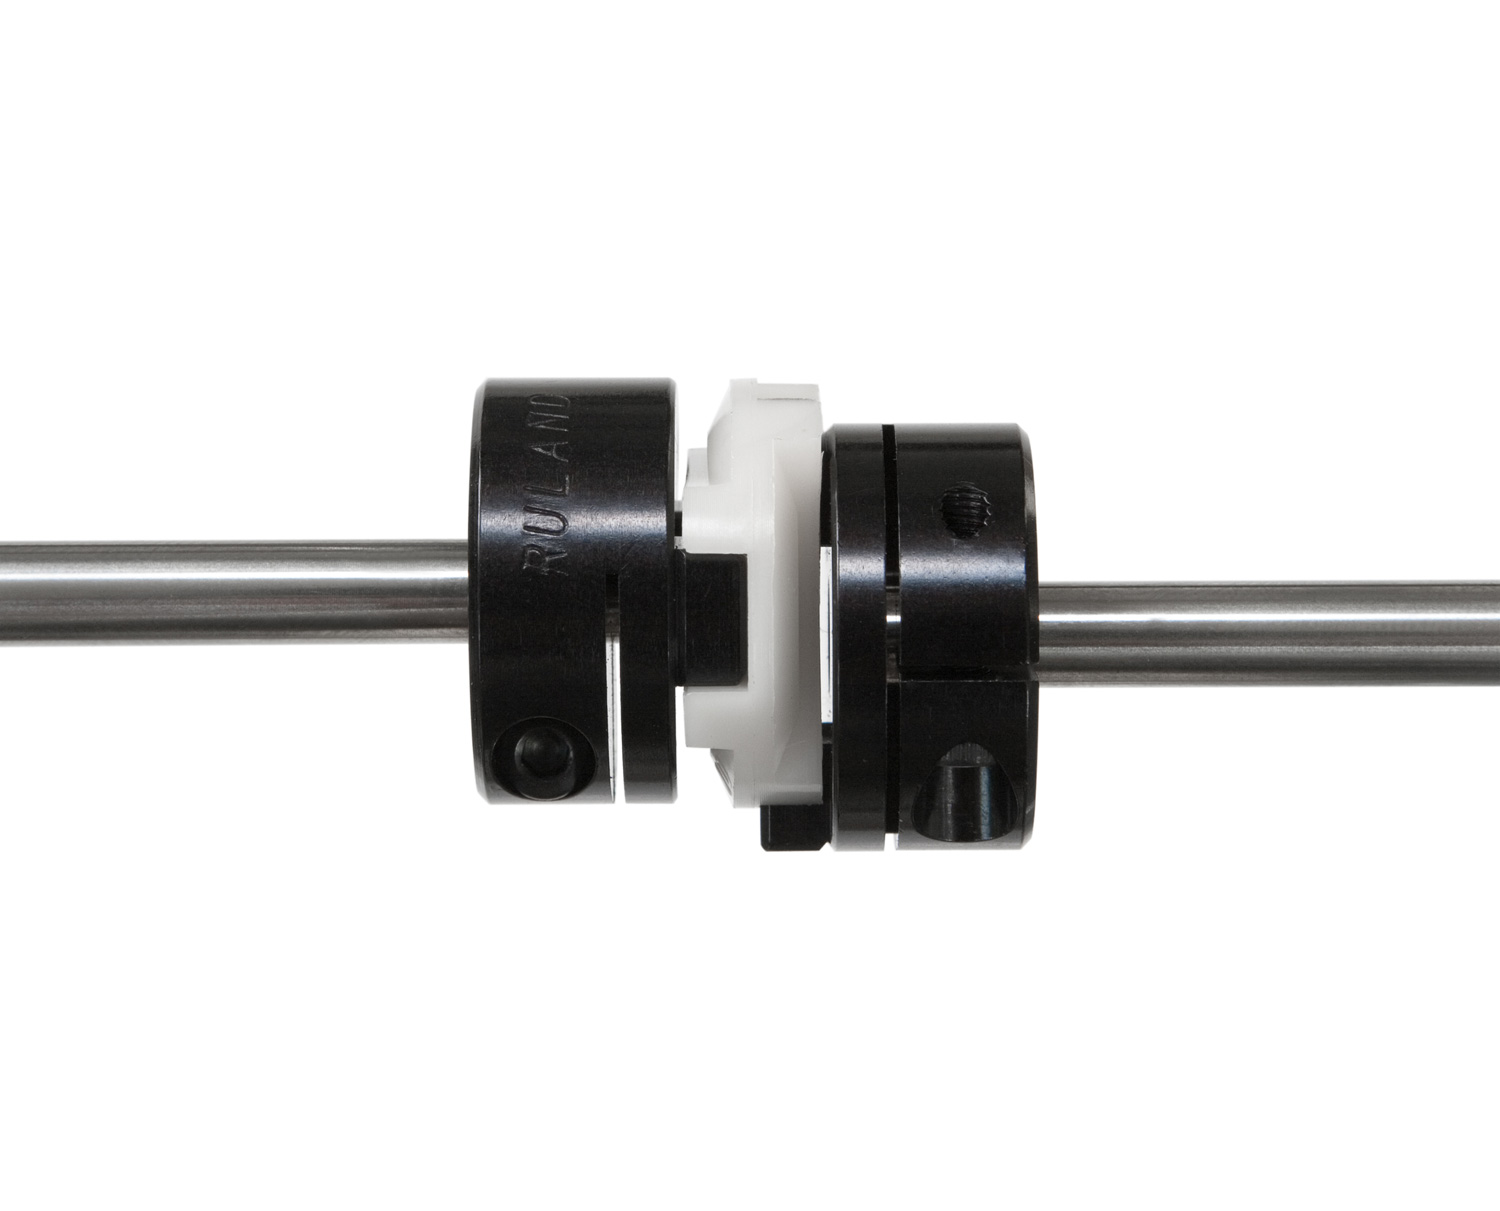 Oldham couplings are ideal for applications with high parallel misalignment